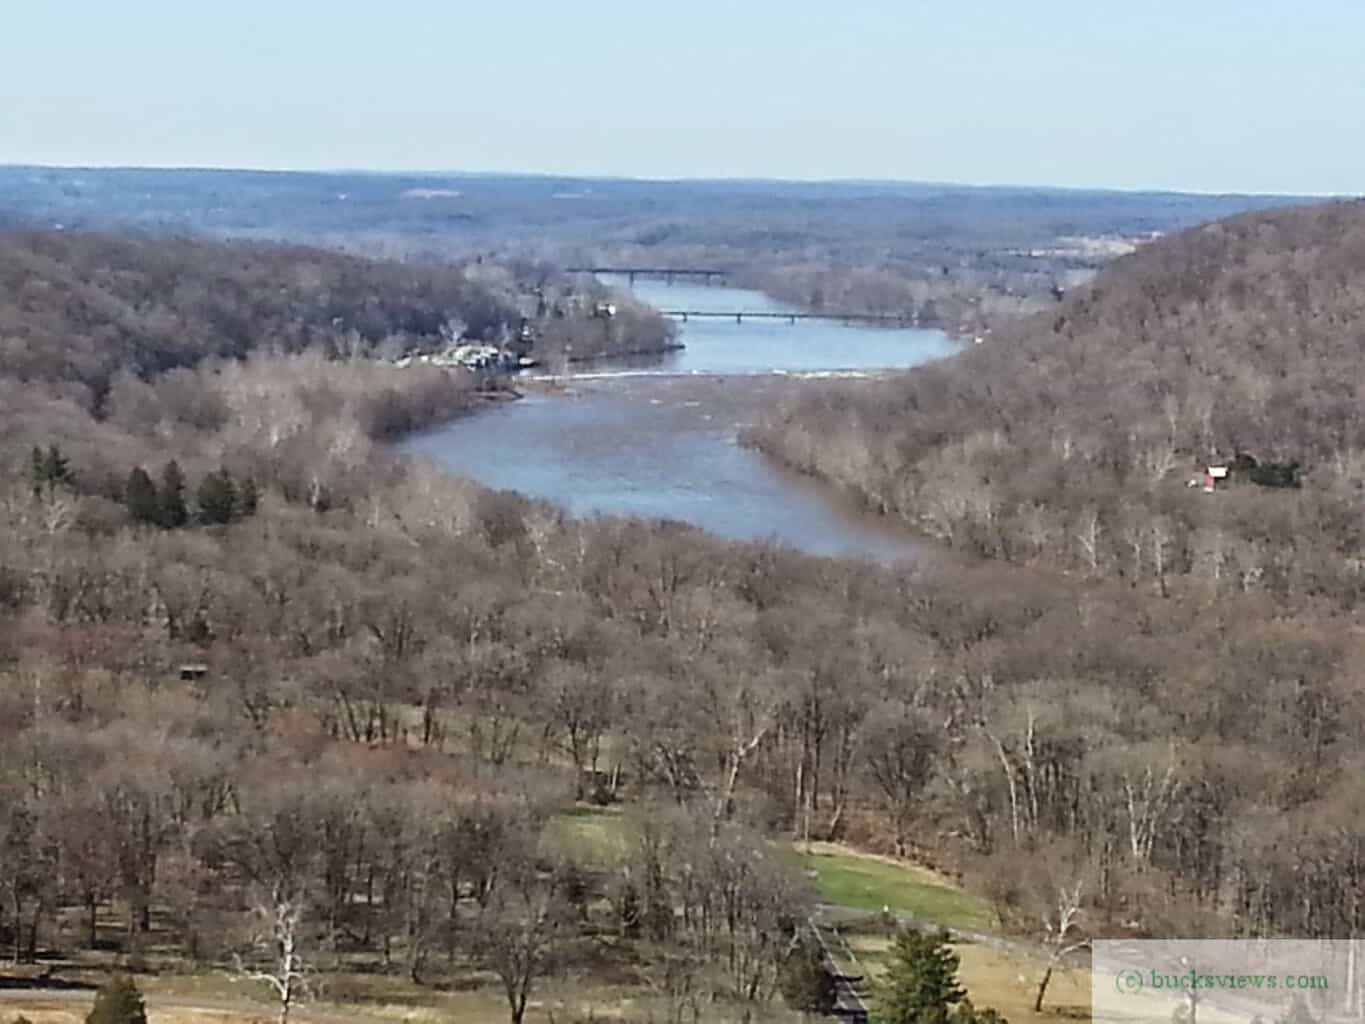 The view from Bowman's Tower just outside of New Hope